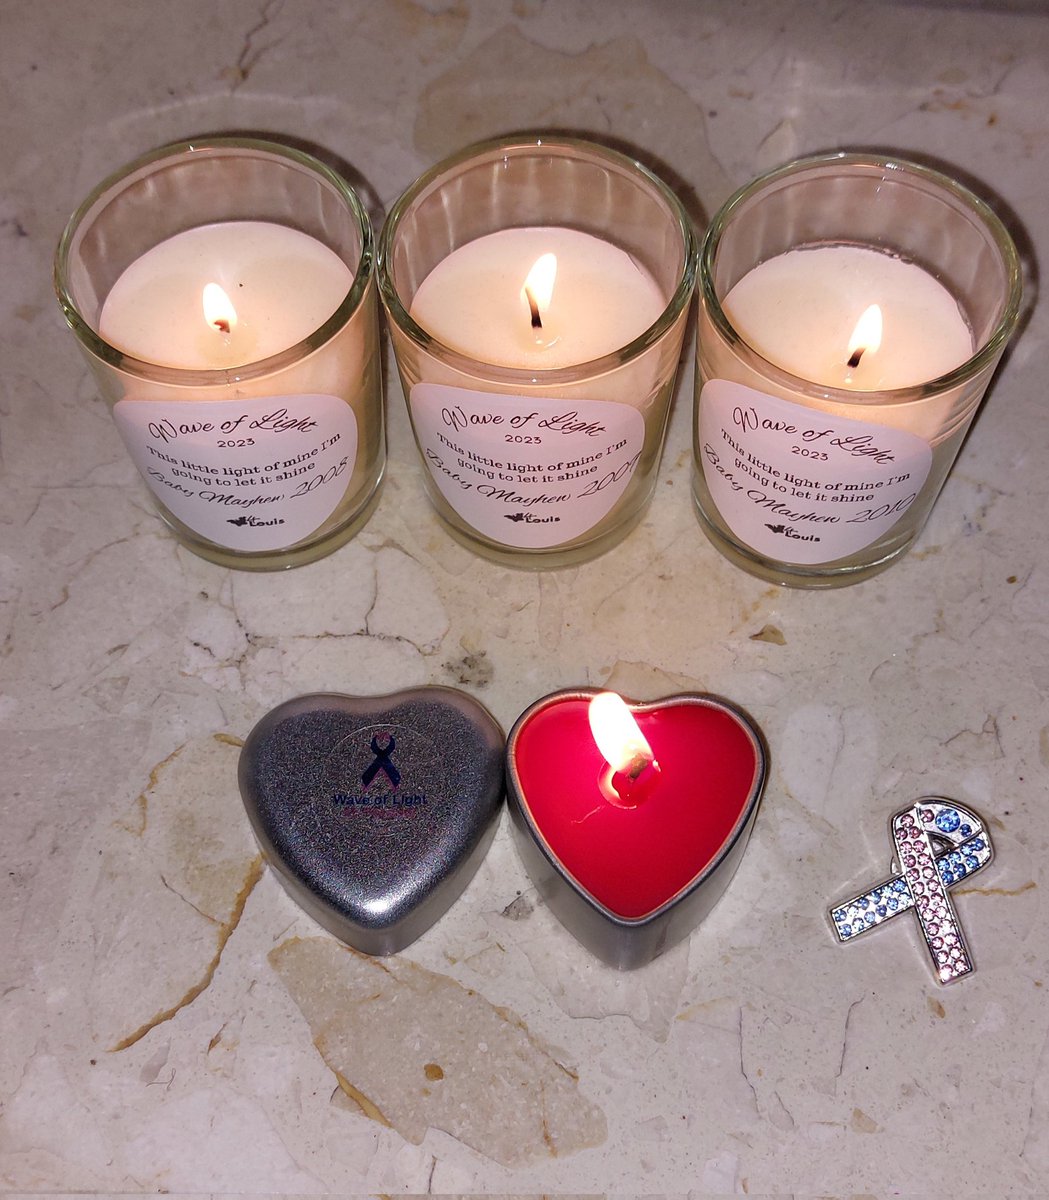 @SandsUK Lit for the 3 babies we never got to meet. Thank you for my wave of light tin candle 
#waveoflight2023
#recurrentmiscarriage
#BabyLossAwarenessWeek 
#iam1in4